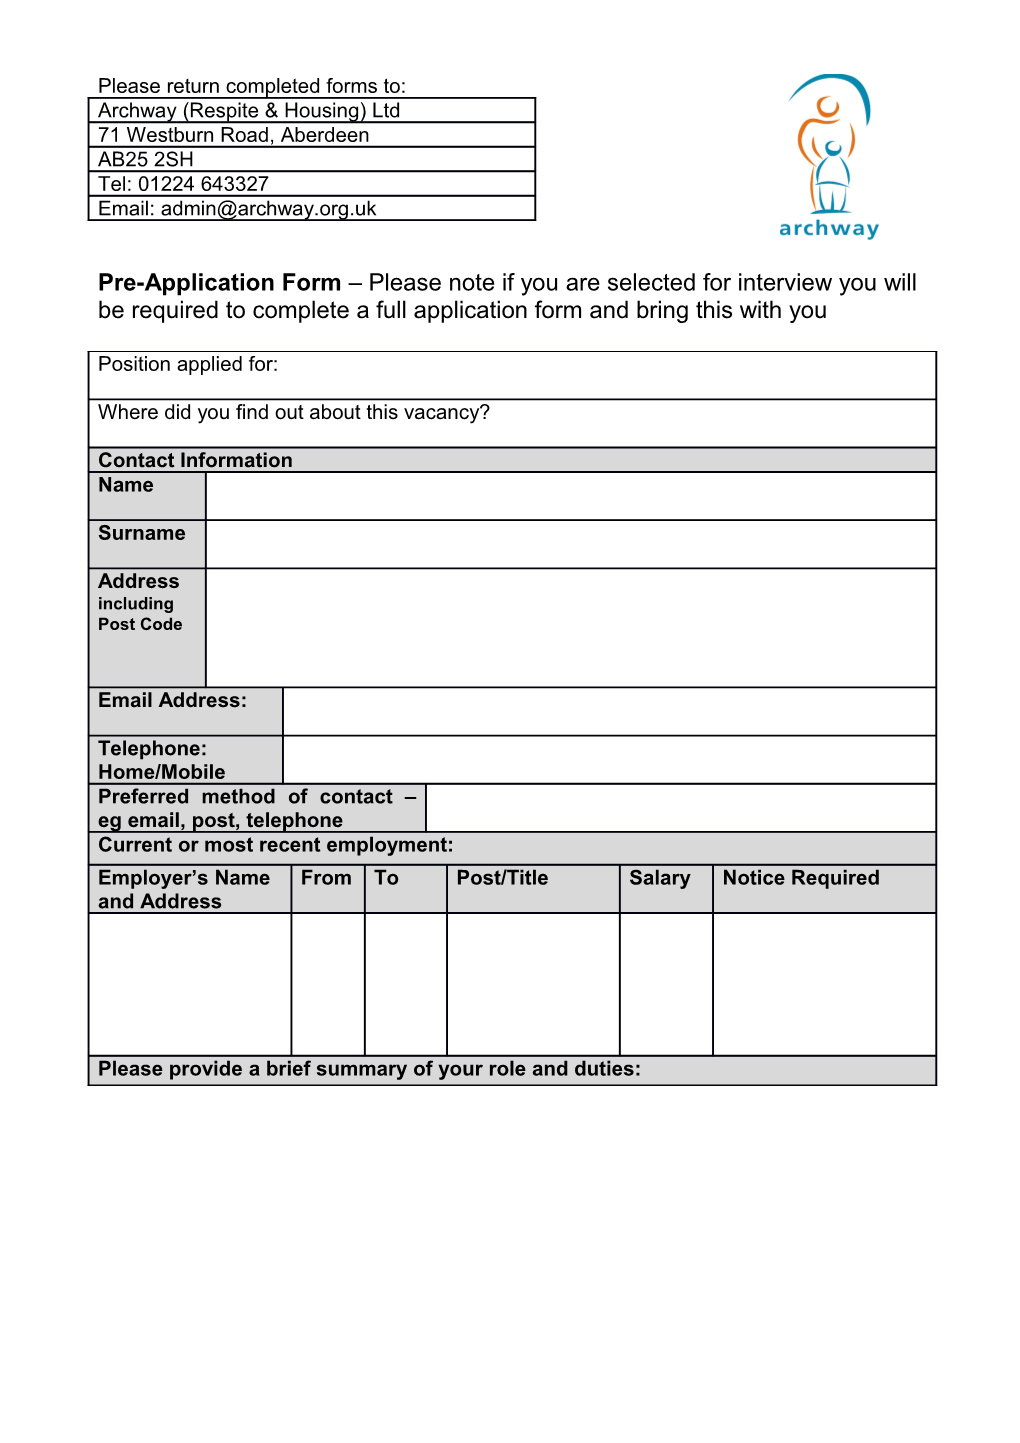 Please Return Completed Forms To